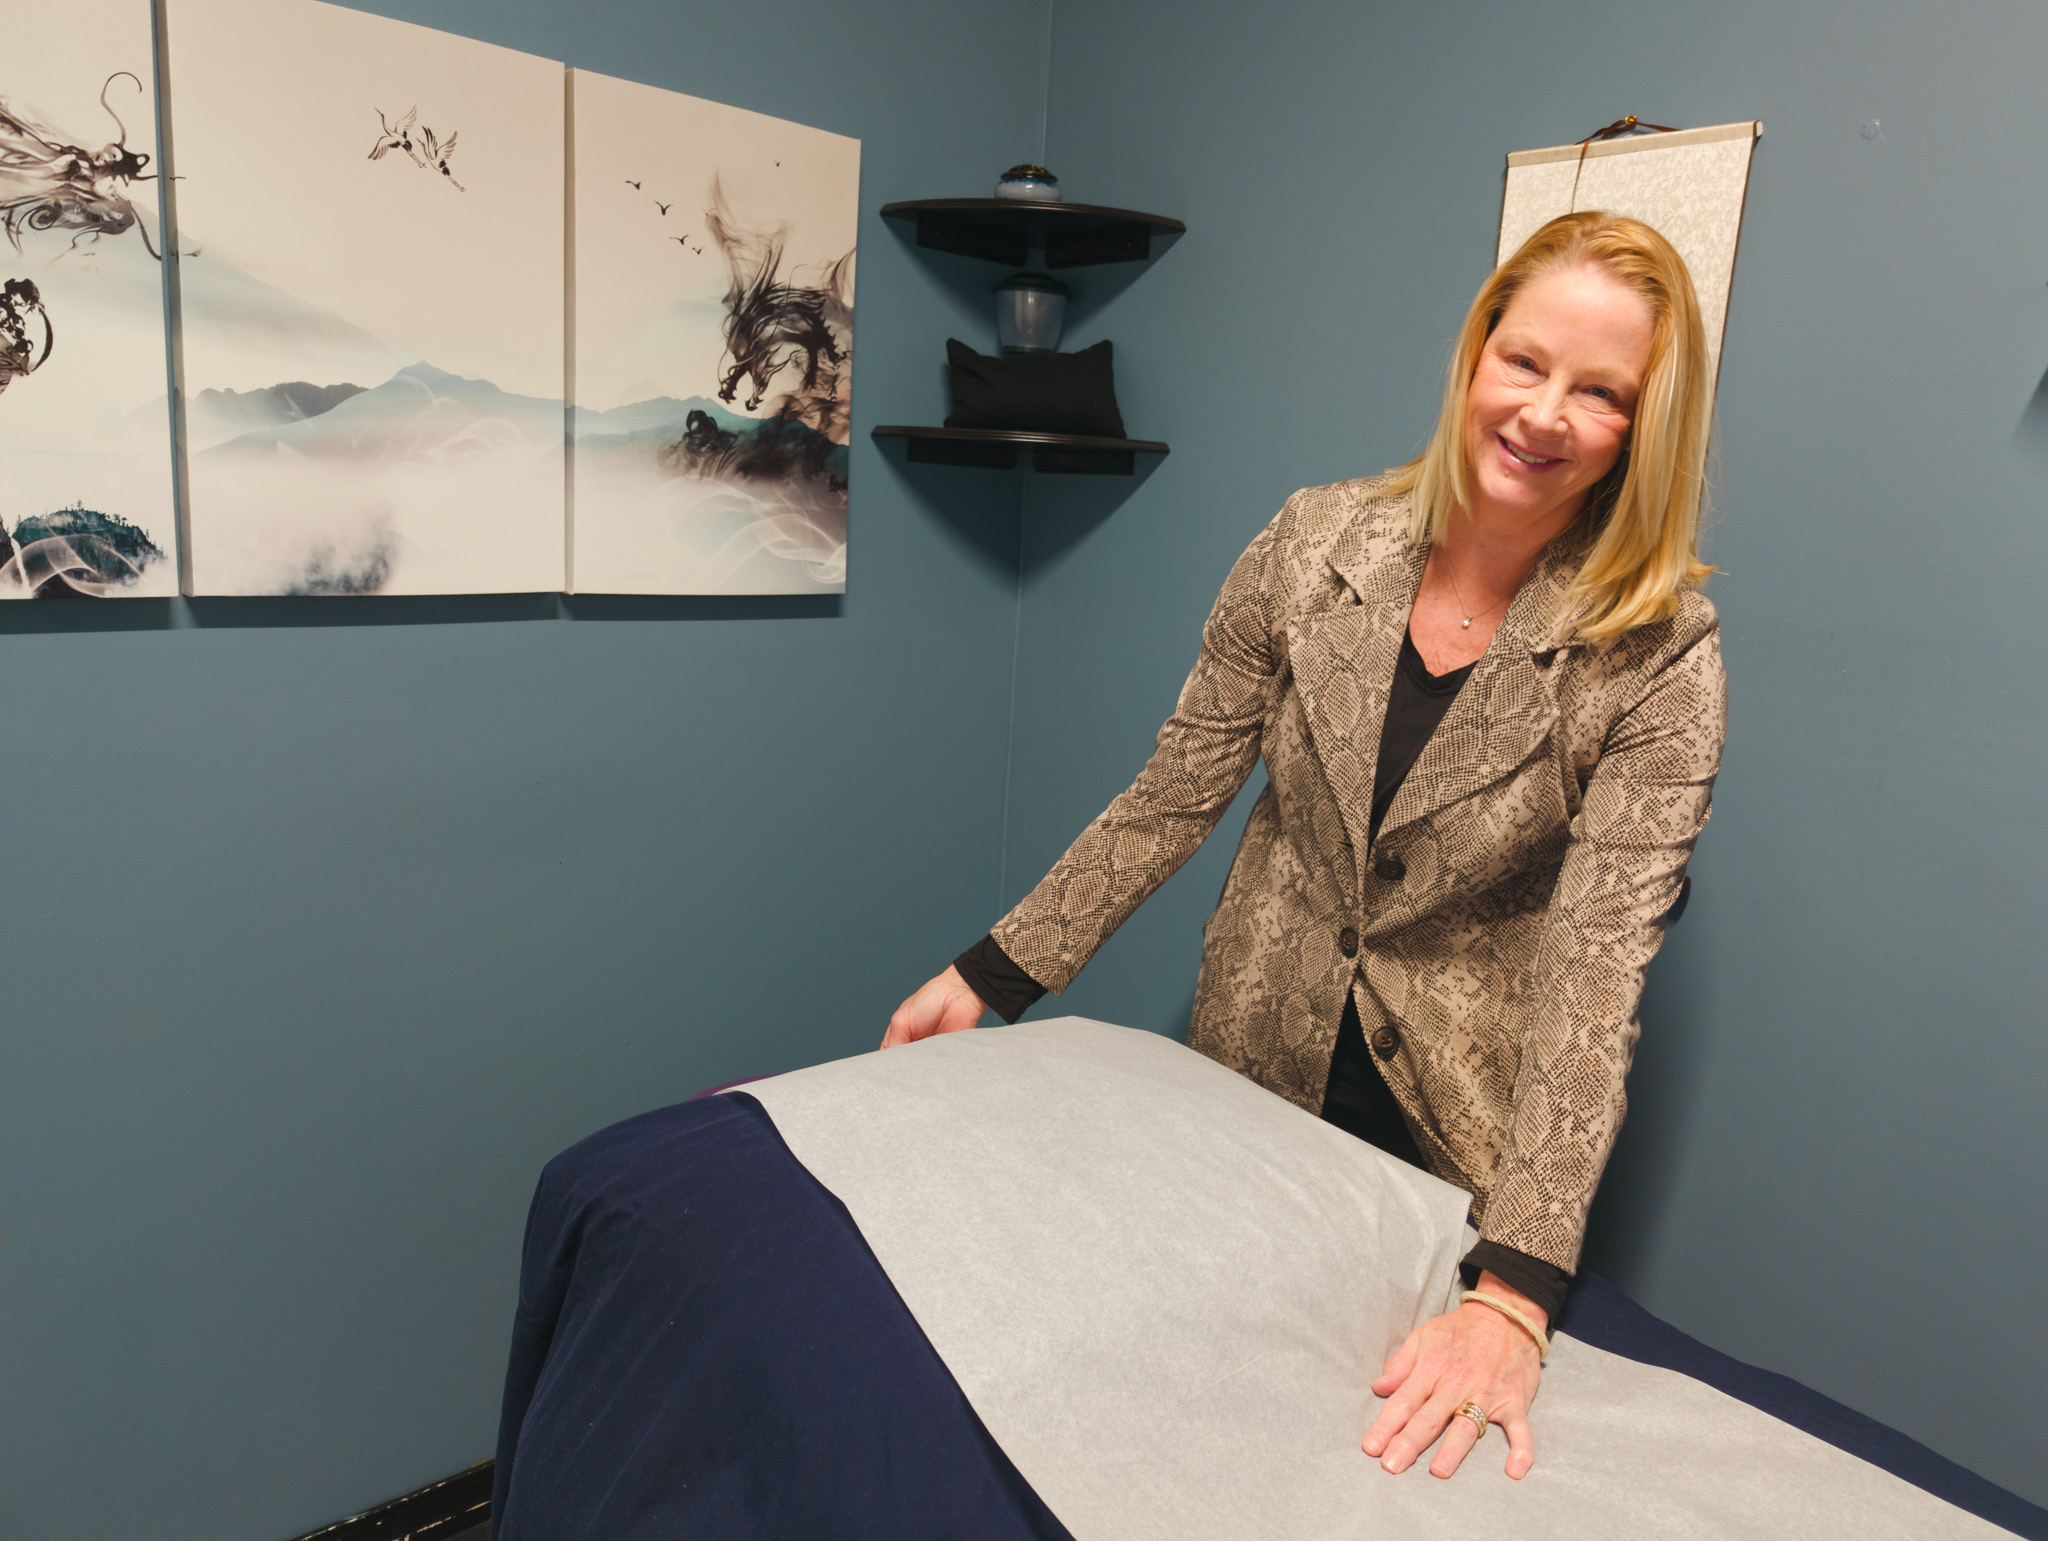 Acupuncturist Patty Kuchar, at her location over an empty patient bed.